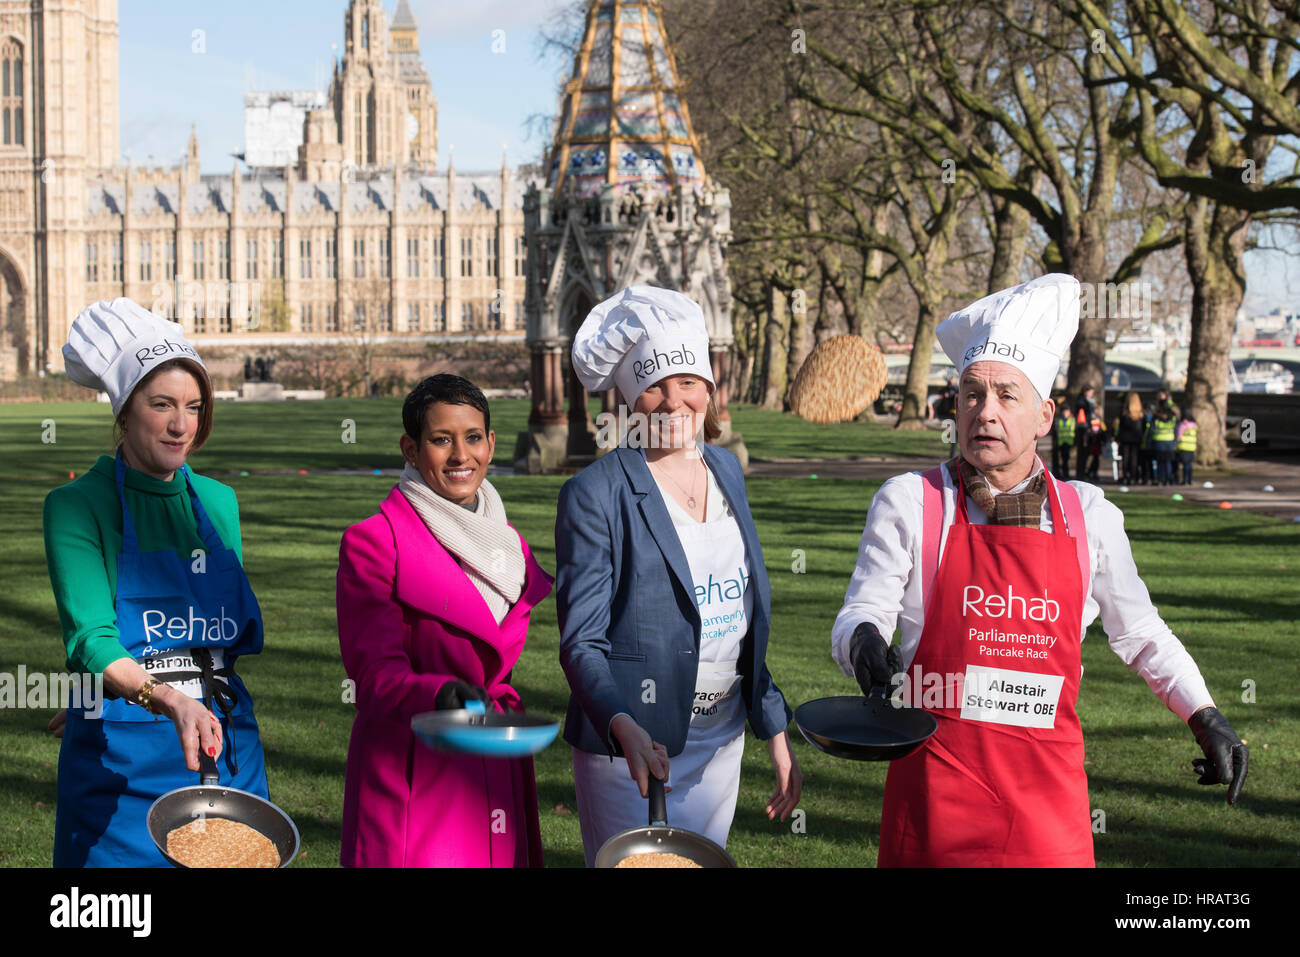 London, UK. 28th Feb, 2017. Team captains and Naga Munchetty practice a toss at the start of the Rehab Parliamentary Pancake race. Left to right Barnoness Bertin, Naga Munchetty, Tracy Crouch MP and Alastair Steward OBE Credit: Ian Davidson/Alamy Live News Stock Photo